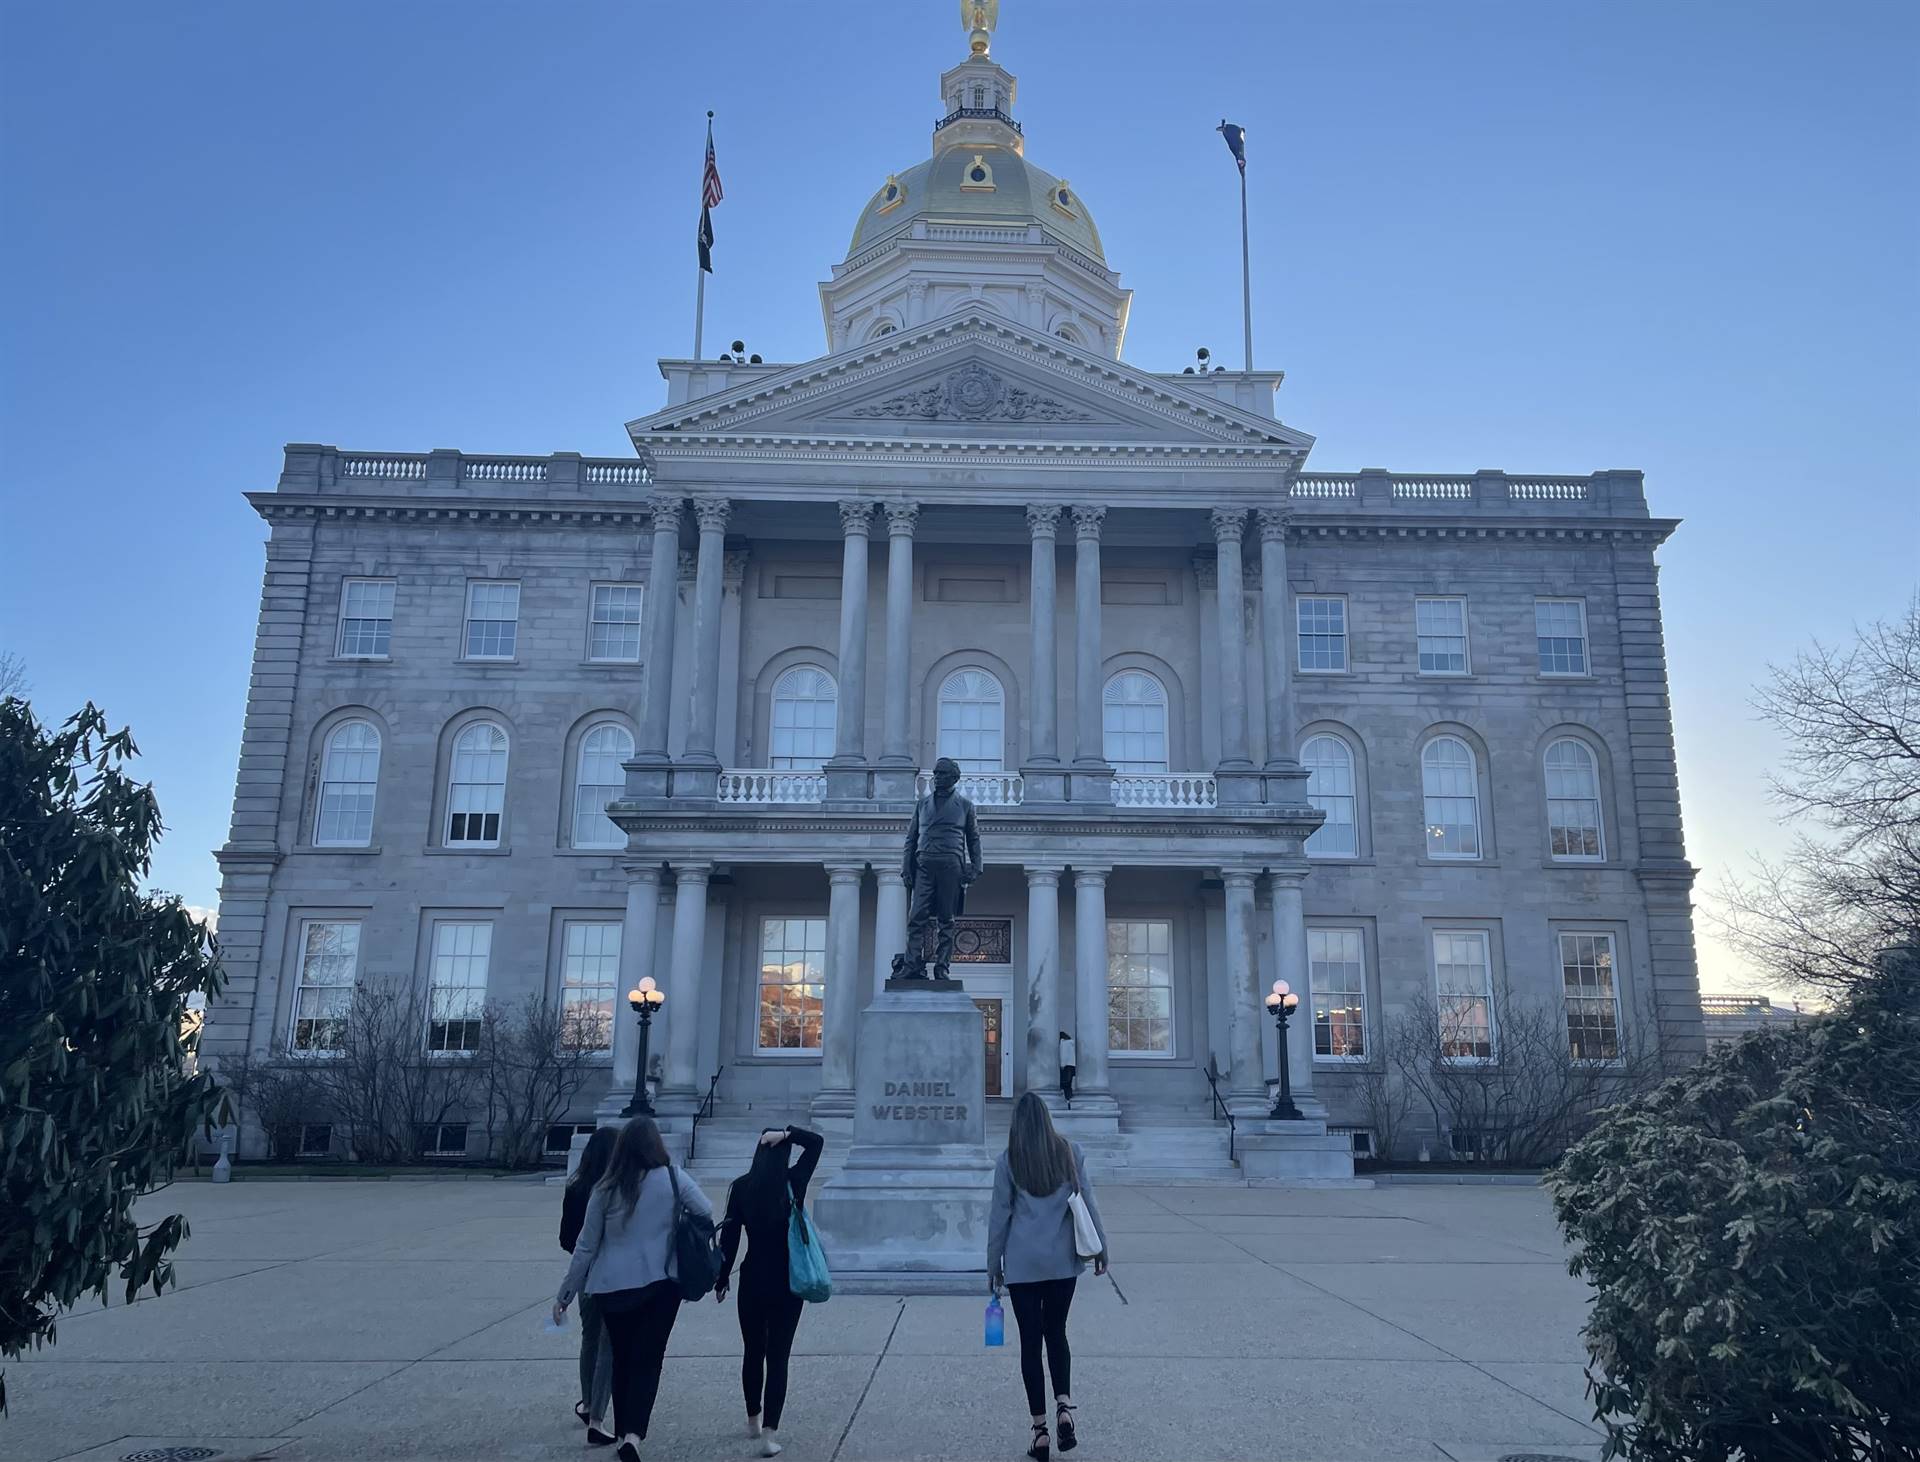 Arriving at the State House 2022-2023